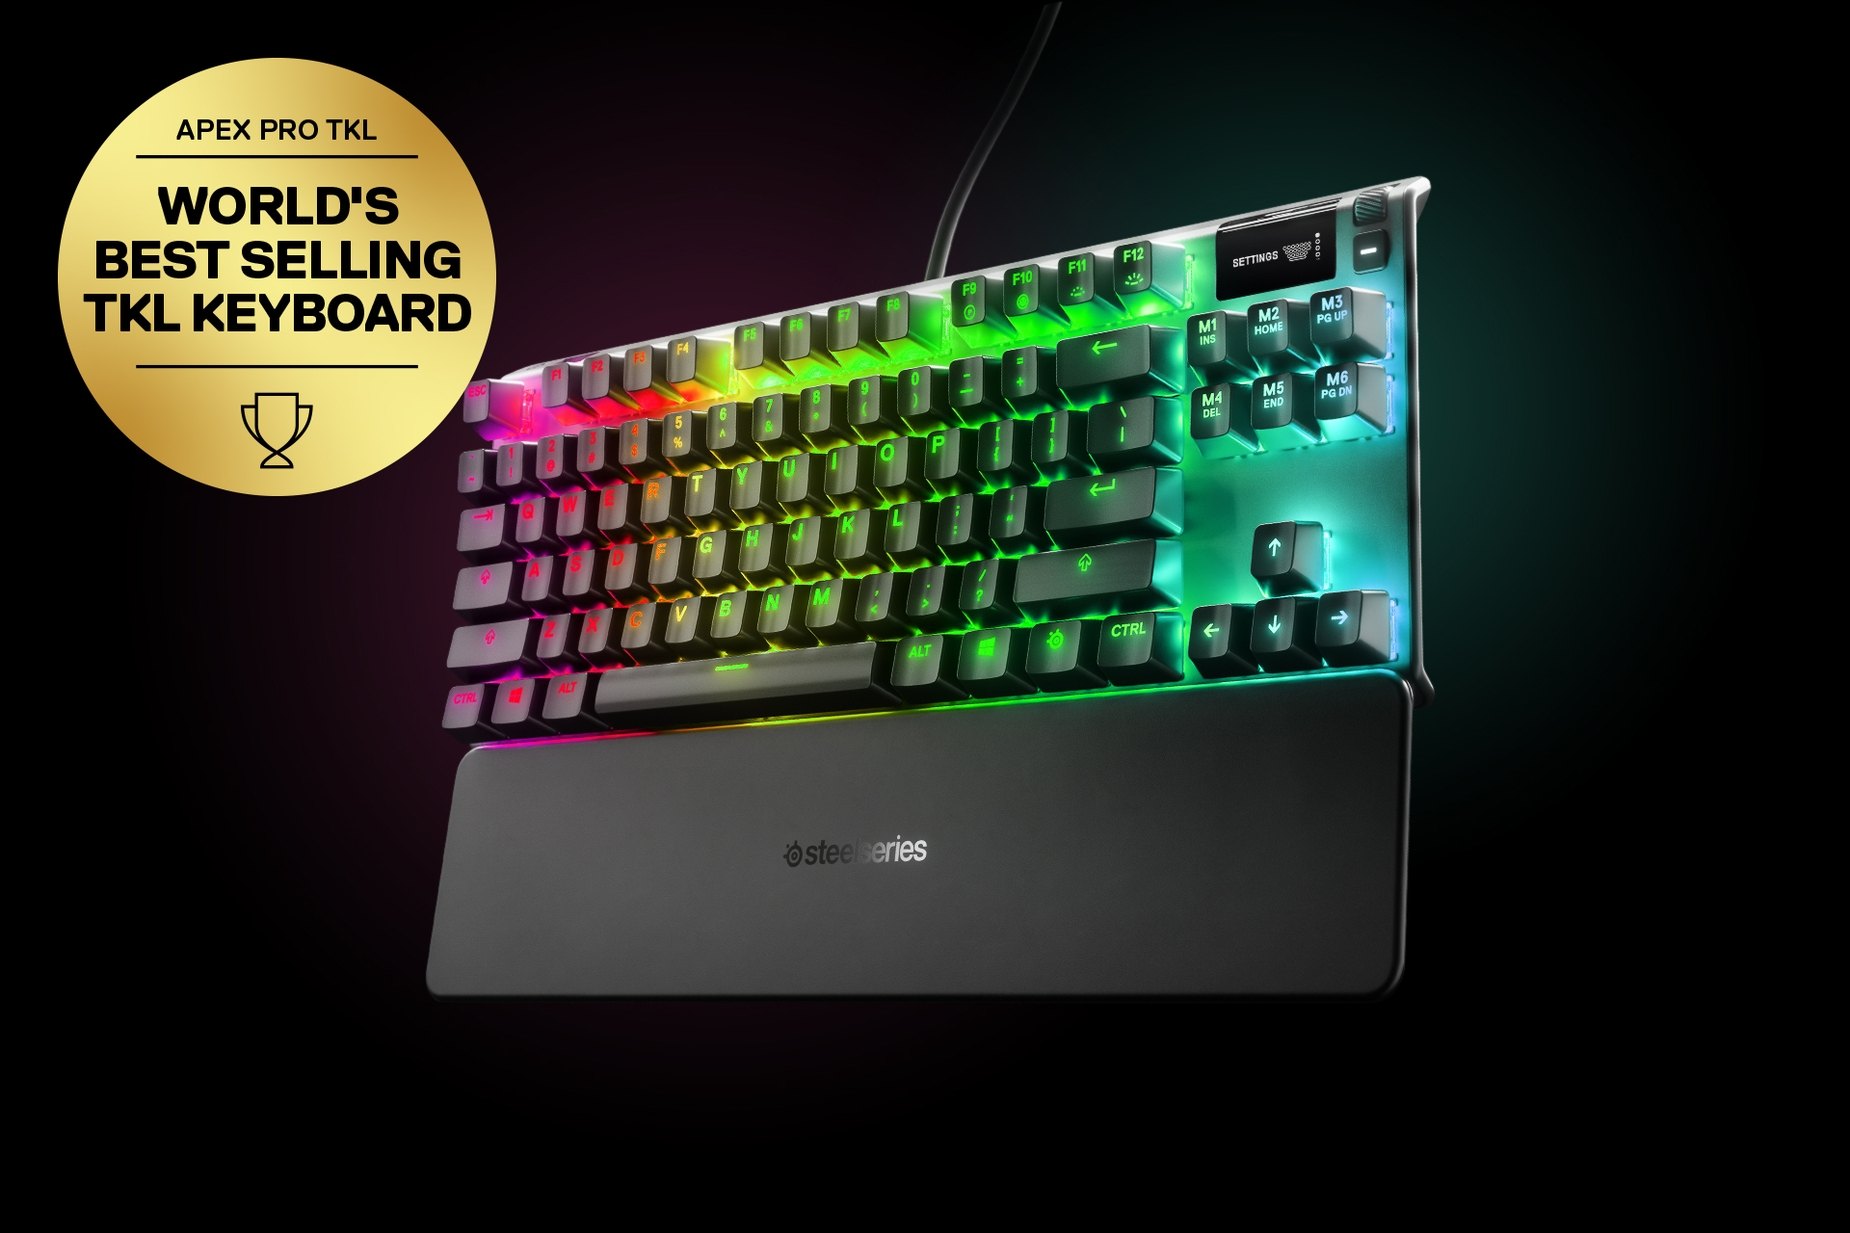 
 Nordic - Apex Pro TKL gaming keyboard with the illumination lit up on dark background, also shows the OLED screen and controls used to change settings, switch actuation, and adjust audio. Keyboard has gold award floating next to it with text "World's best selling TKL Keyboard".
 